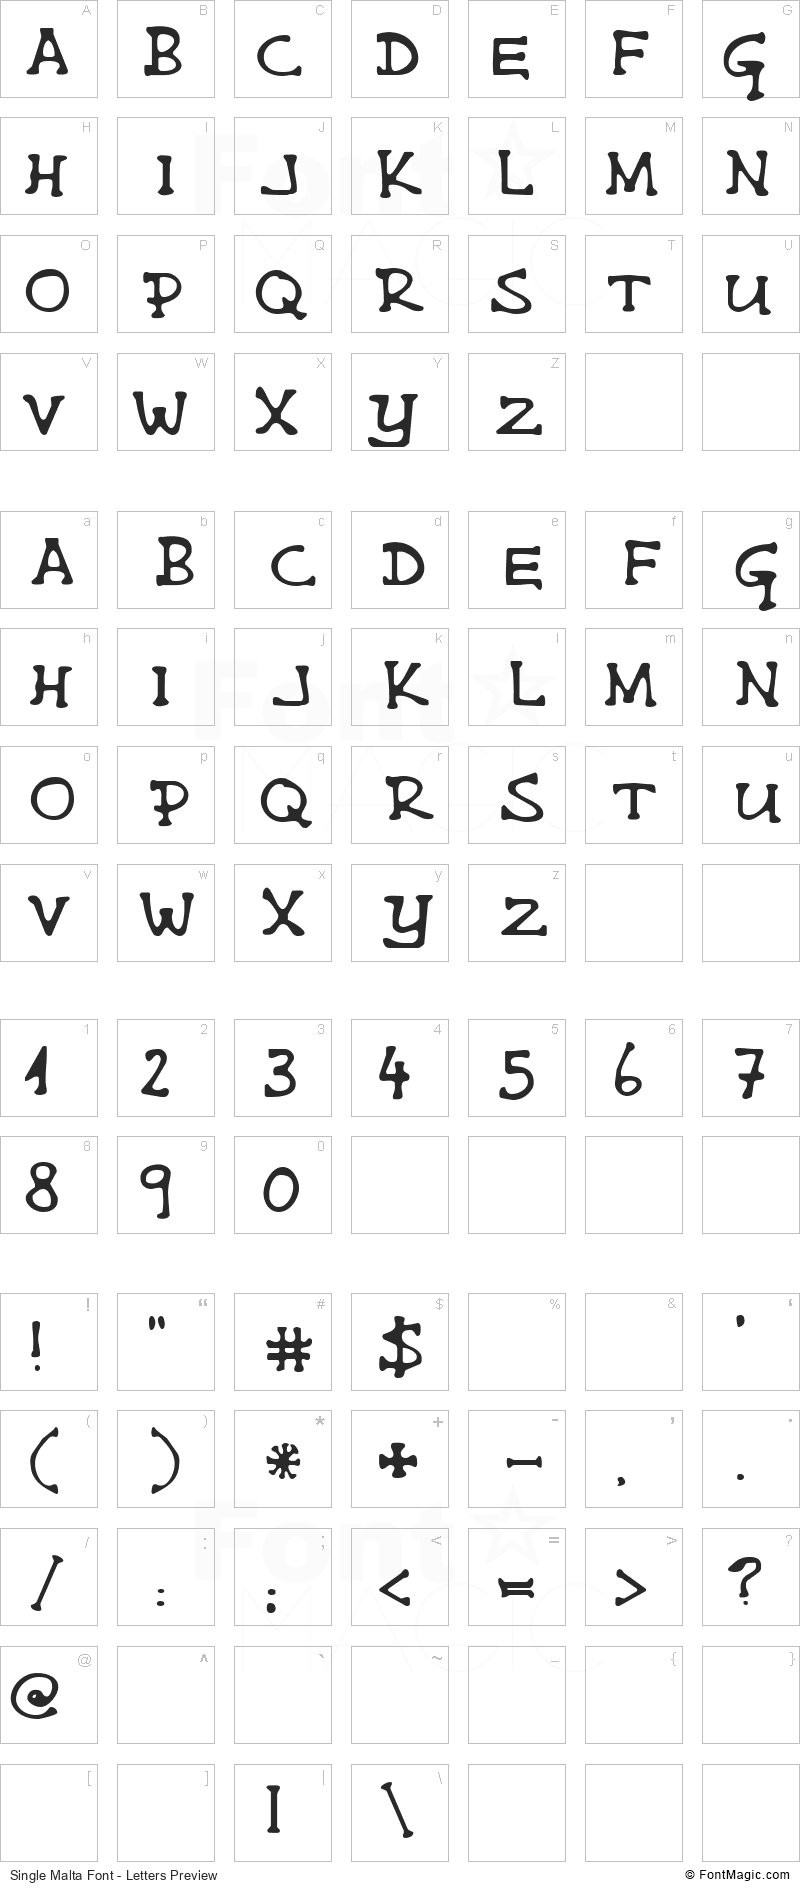 Single Malta Font - All Latters Preview Chart